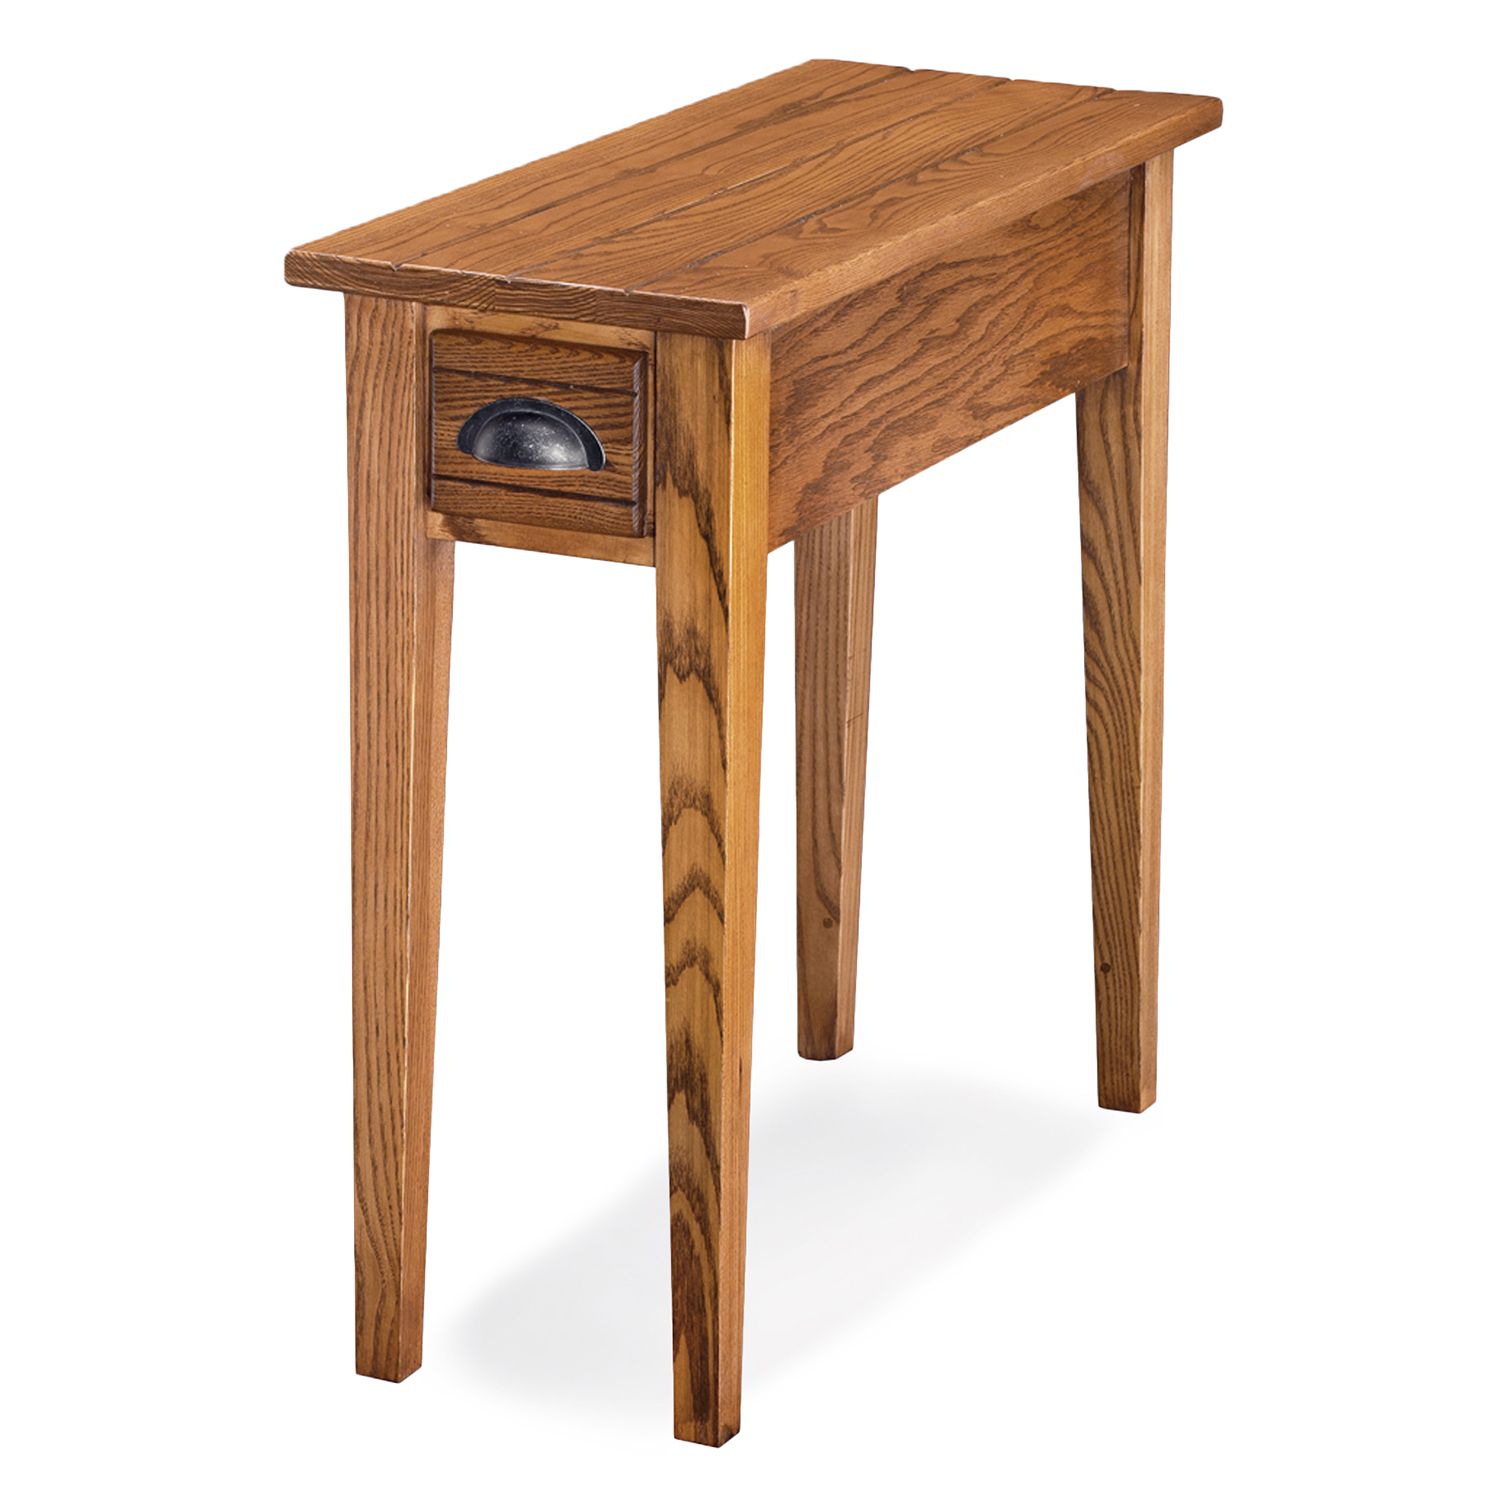 Image for Leick Furniture Candleglow Finish 1-Drawer Narrow End Table at Kohl's.